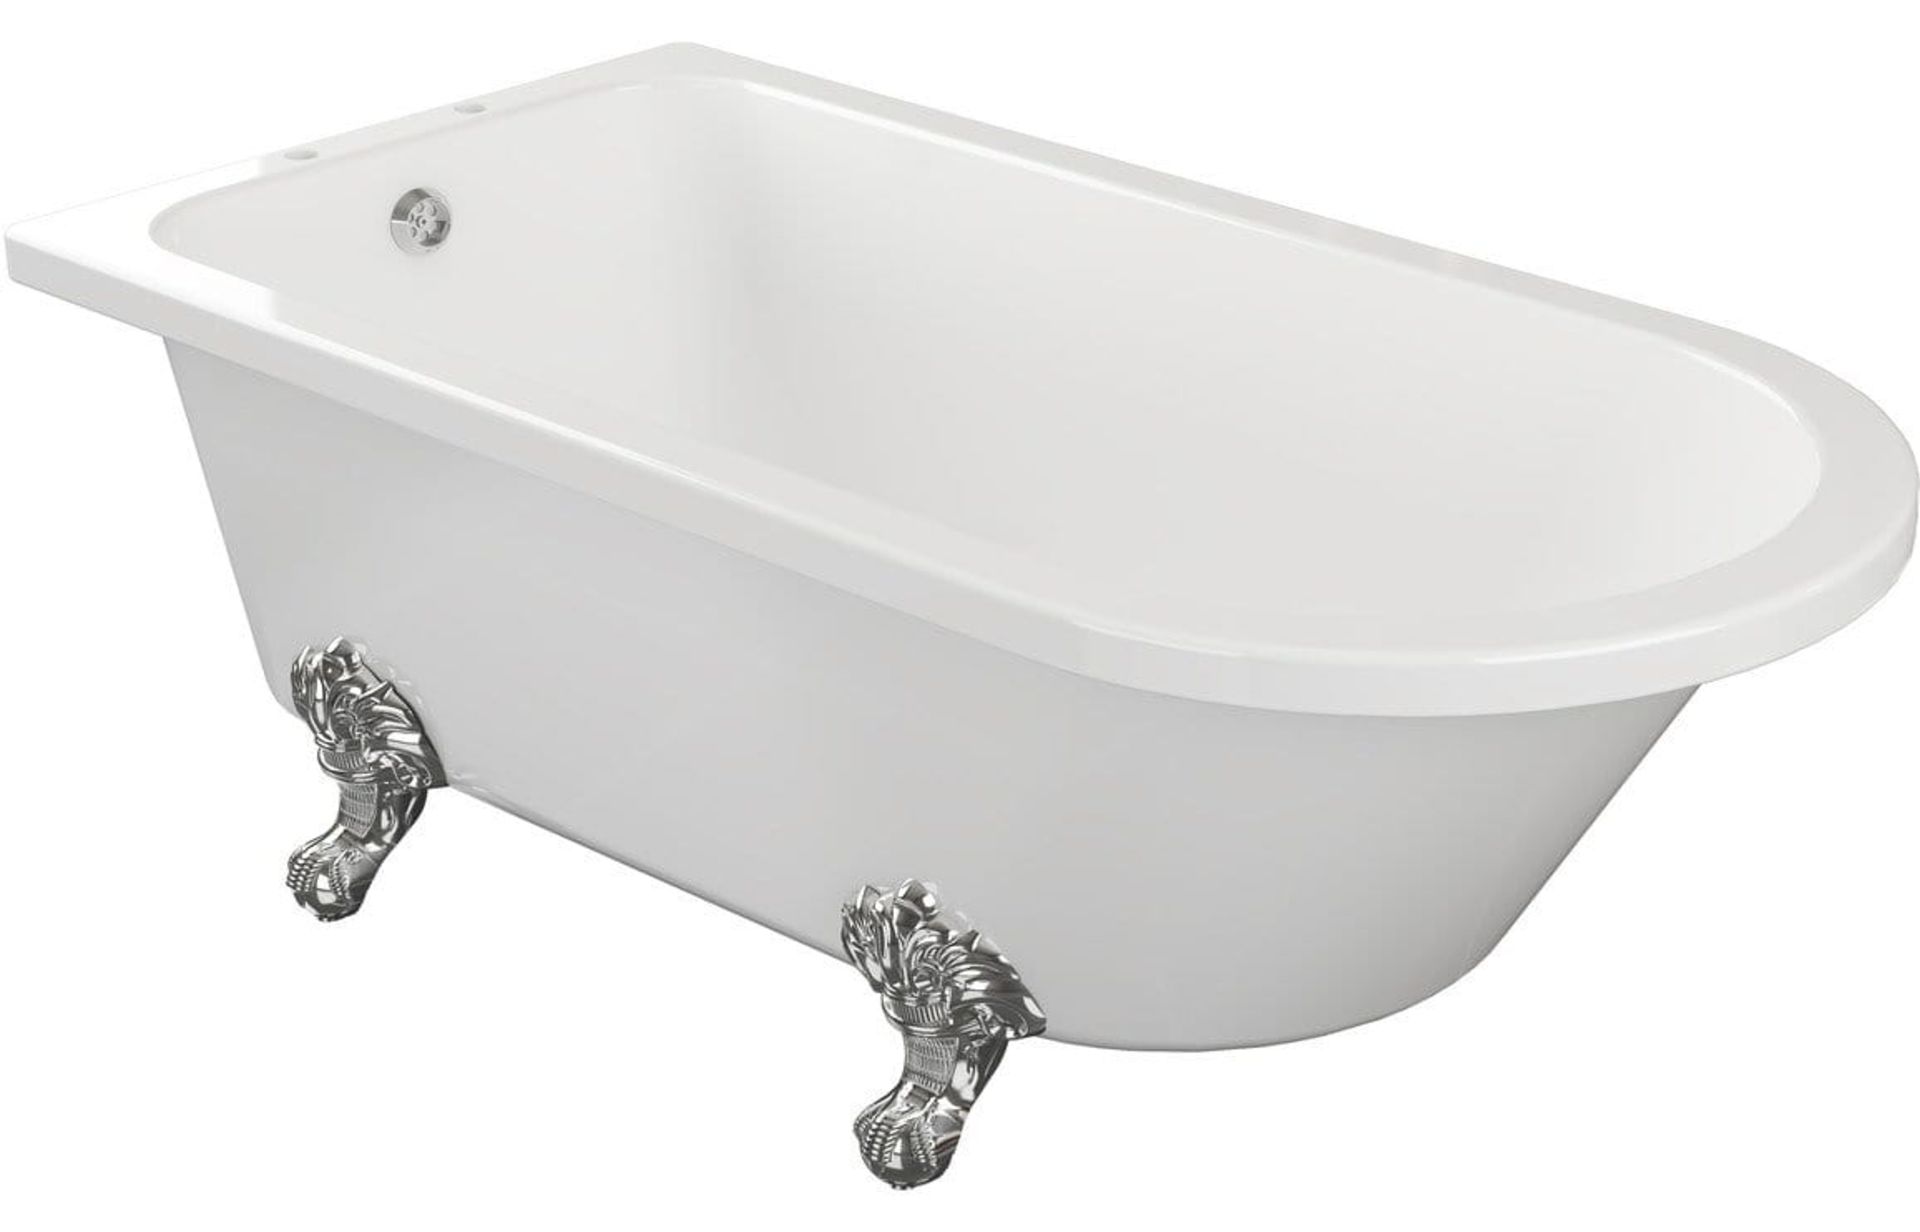 New (G6) 1500mm Single Ended Traditional Corner Freestanding White Bath. RRP £1090.00. Bath I... - Image 2 of 2